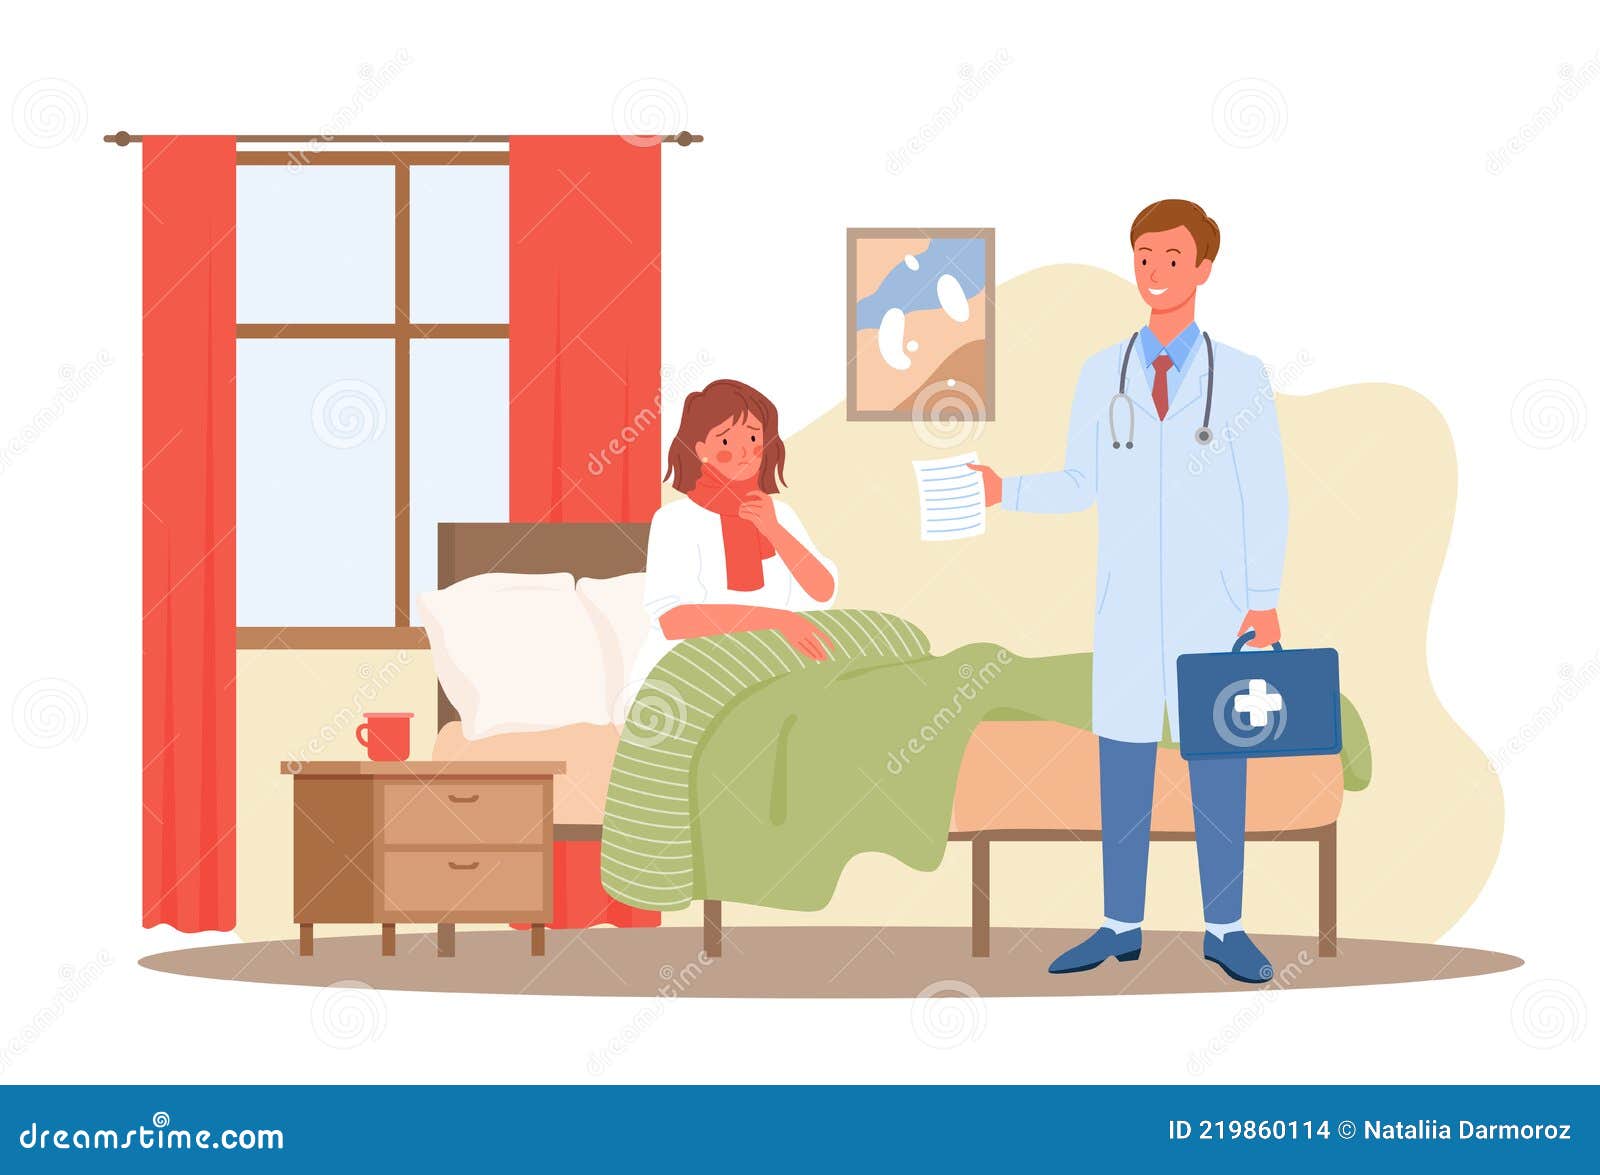 doctor visit, medical diagnostic healthcare service concept with sick patient in bed